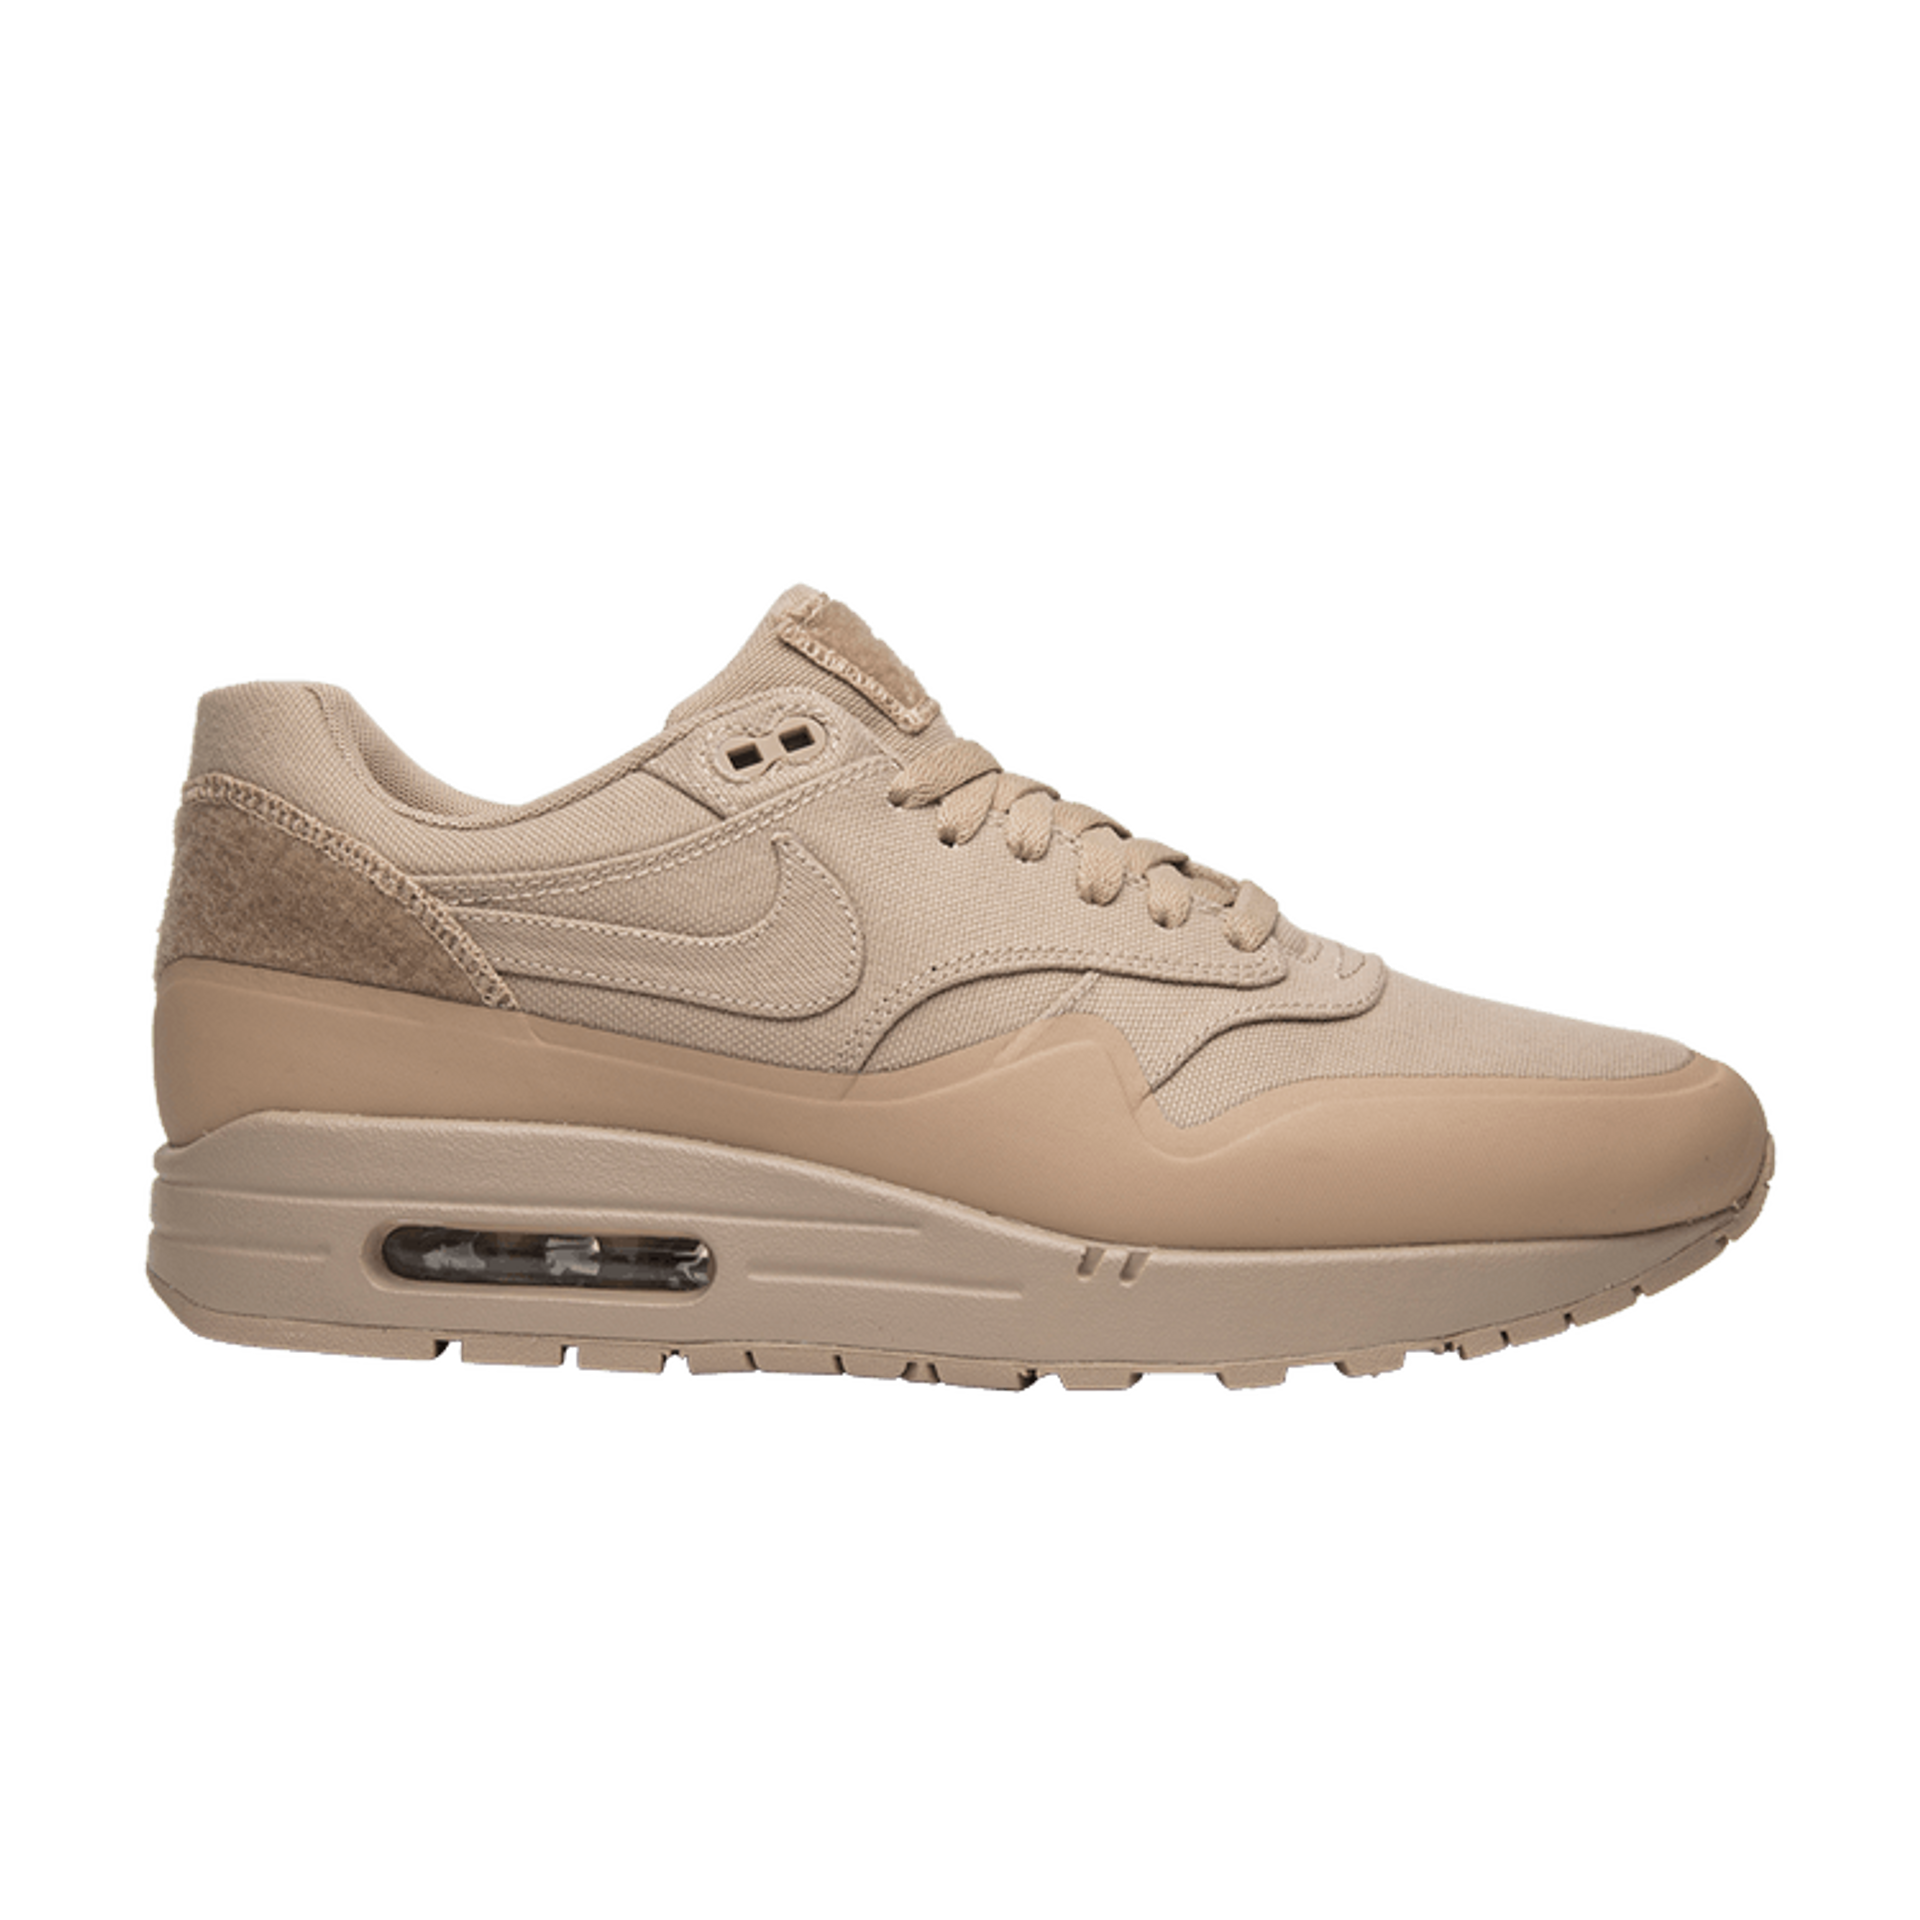 Nike Air Max 1 V SP 'Patch Sand'